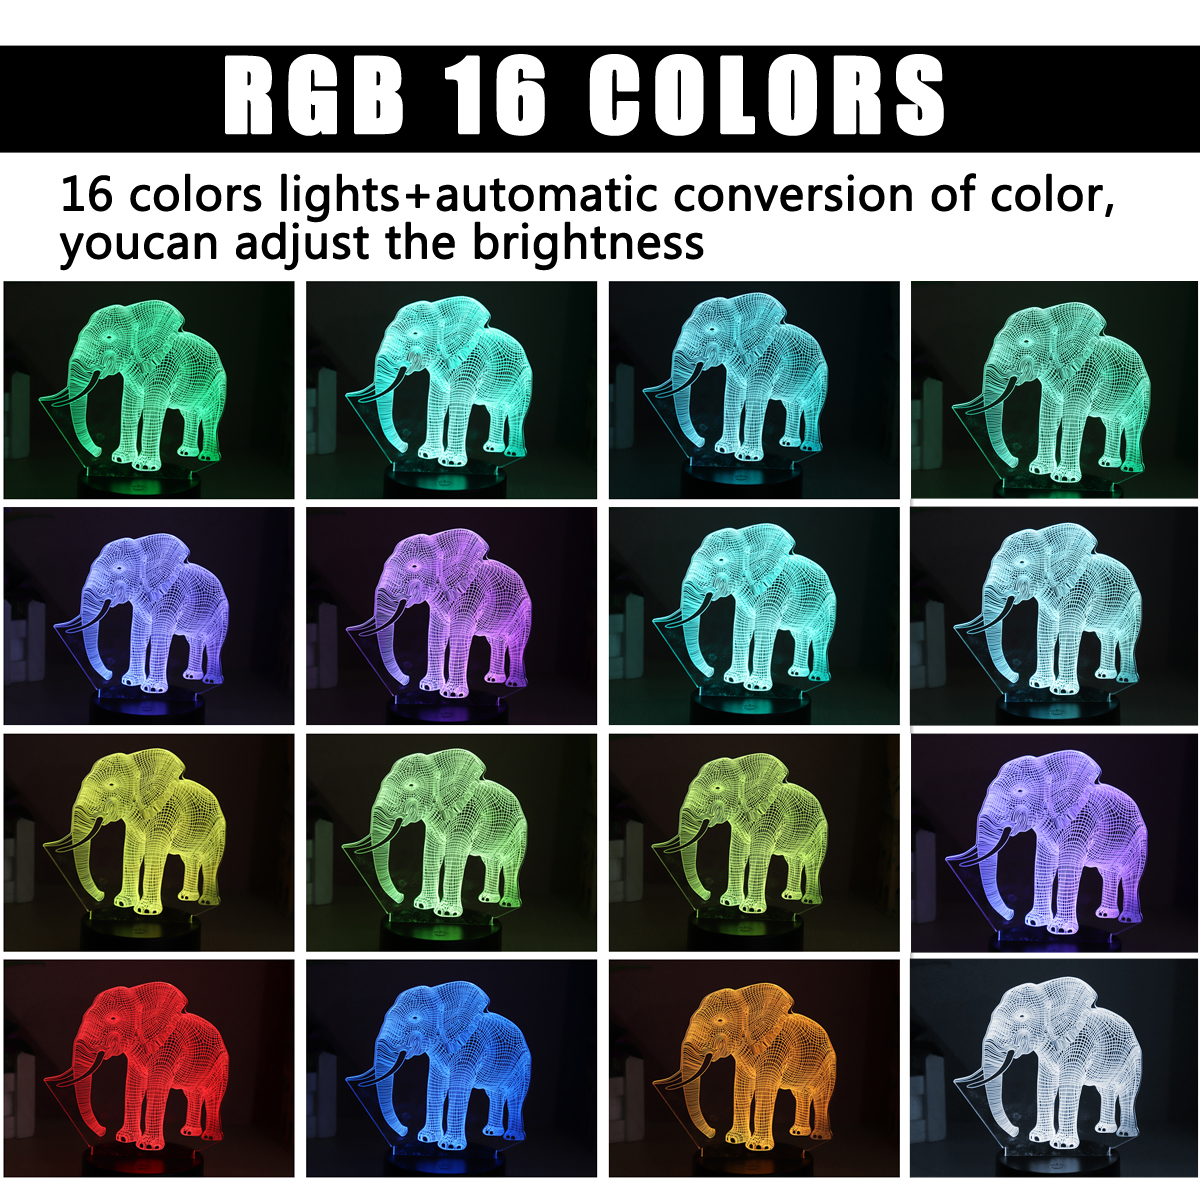 3D-Acrylic-LED-716-Colors-Colorful-Night-Lights-Elephant-Model-Remote-Control-Touch-Switch-Night-Lig-1370467-2